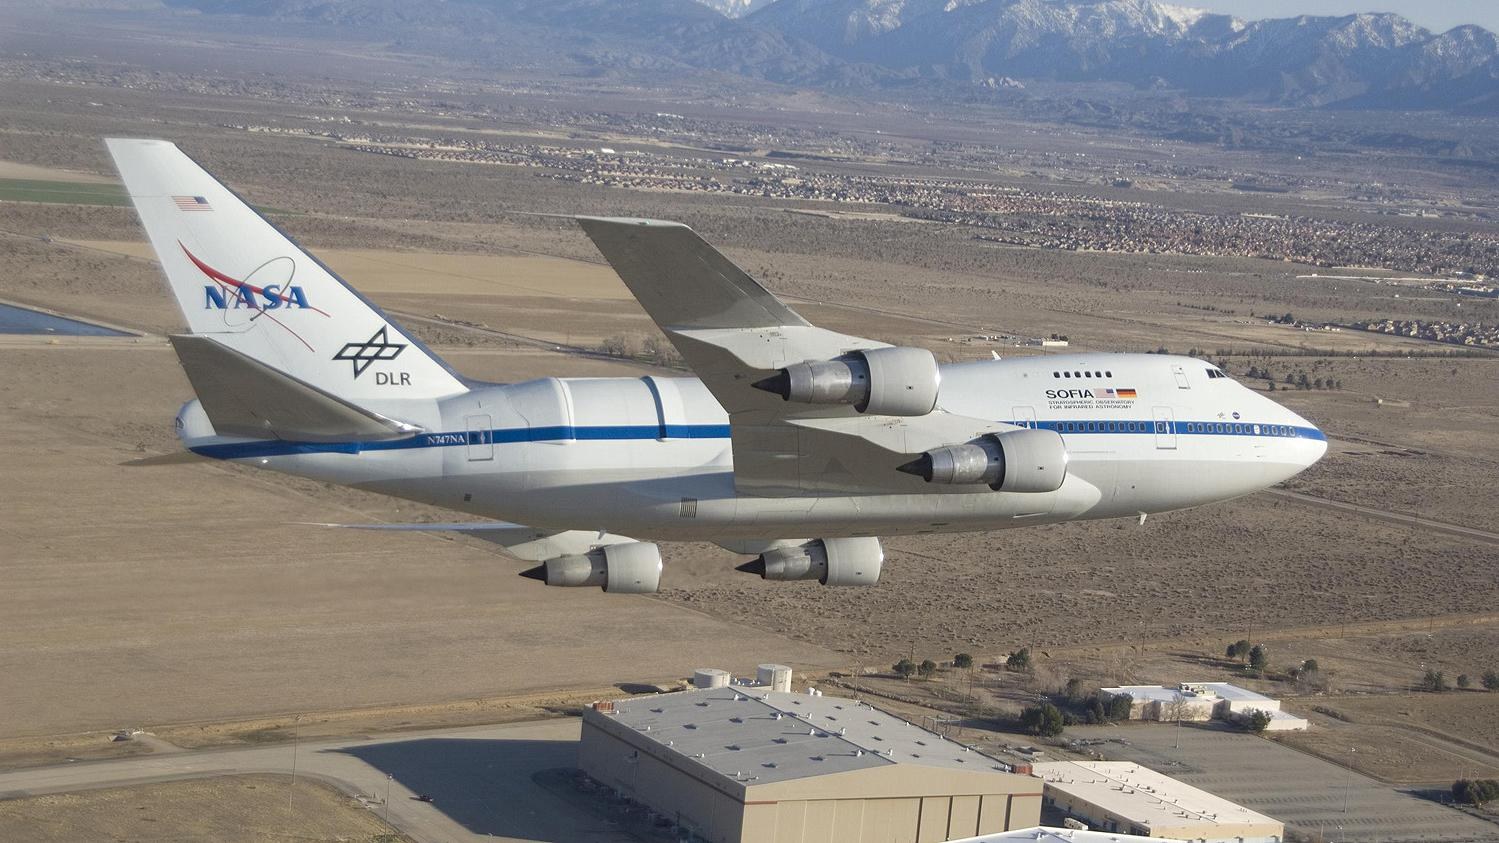 SOFIA over the NASA Dryden Aircraft Operations Facility in Palmdale